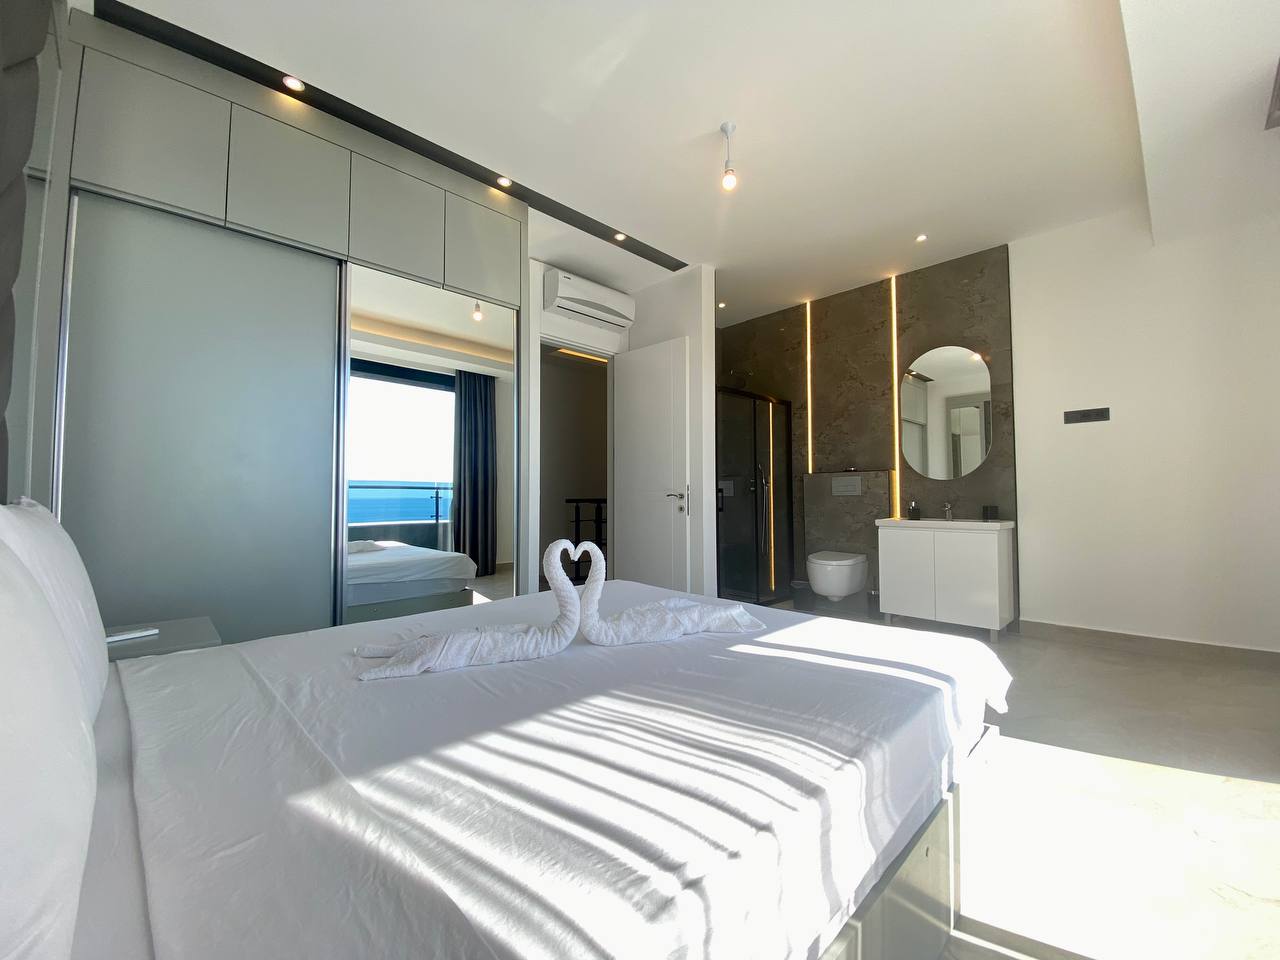 N°22 - Boutique 16 - Duplex Sea Front, For 8 People, Ultra Luxury